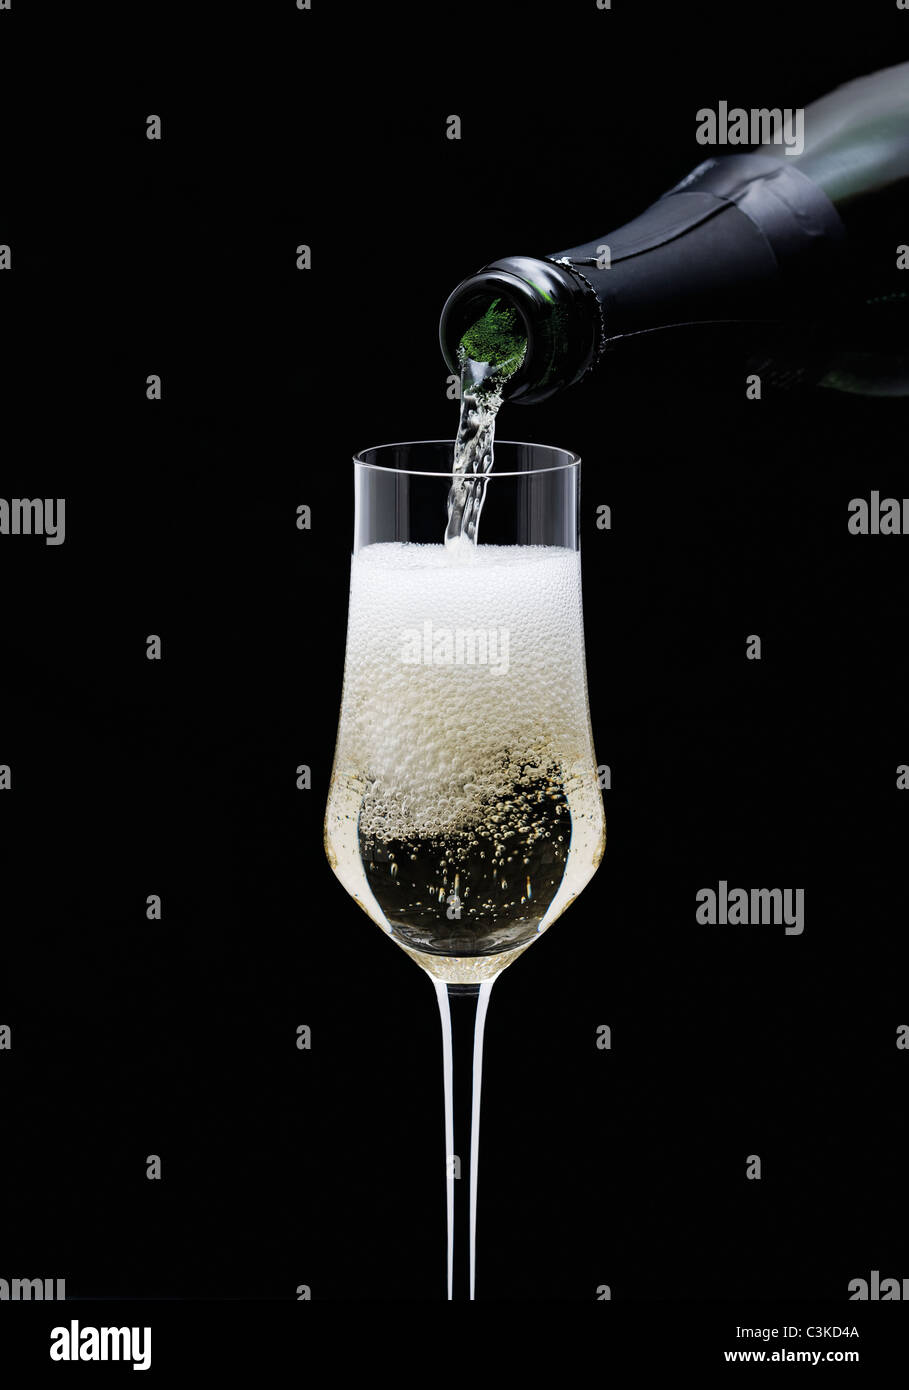 Champagne being pouring into glass from bottle, close-up Stock Photo